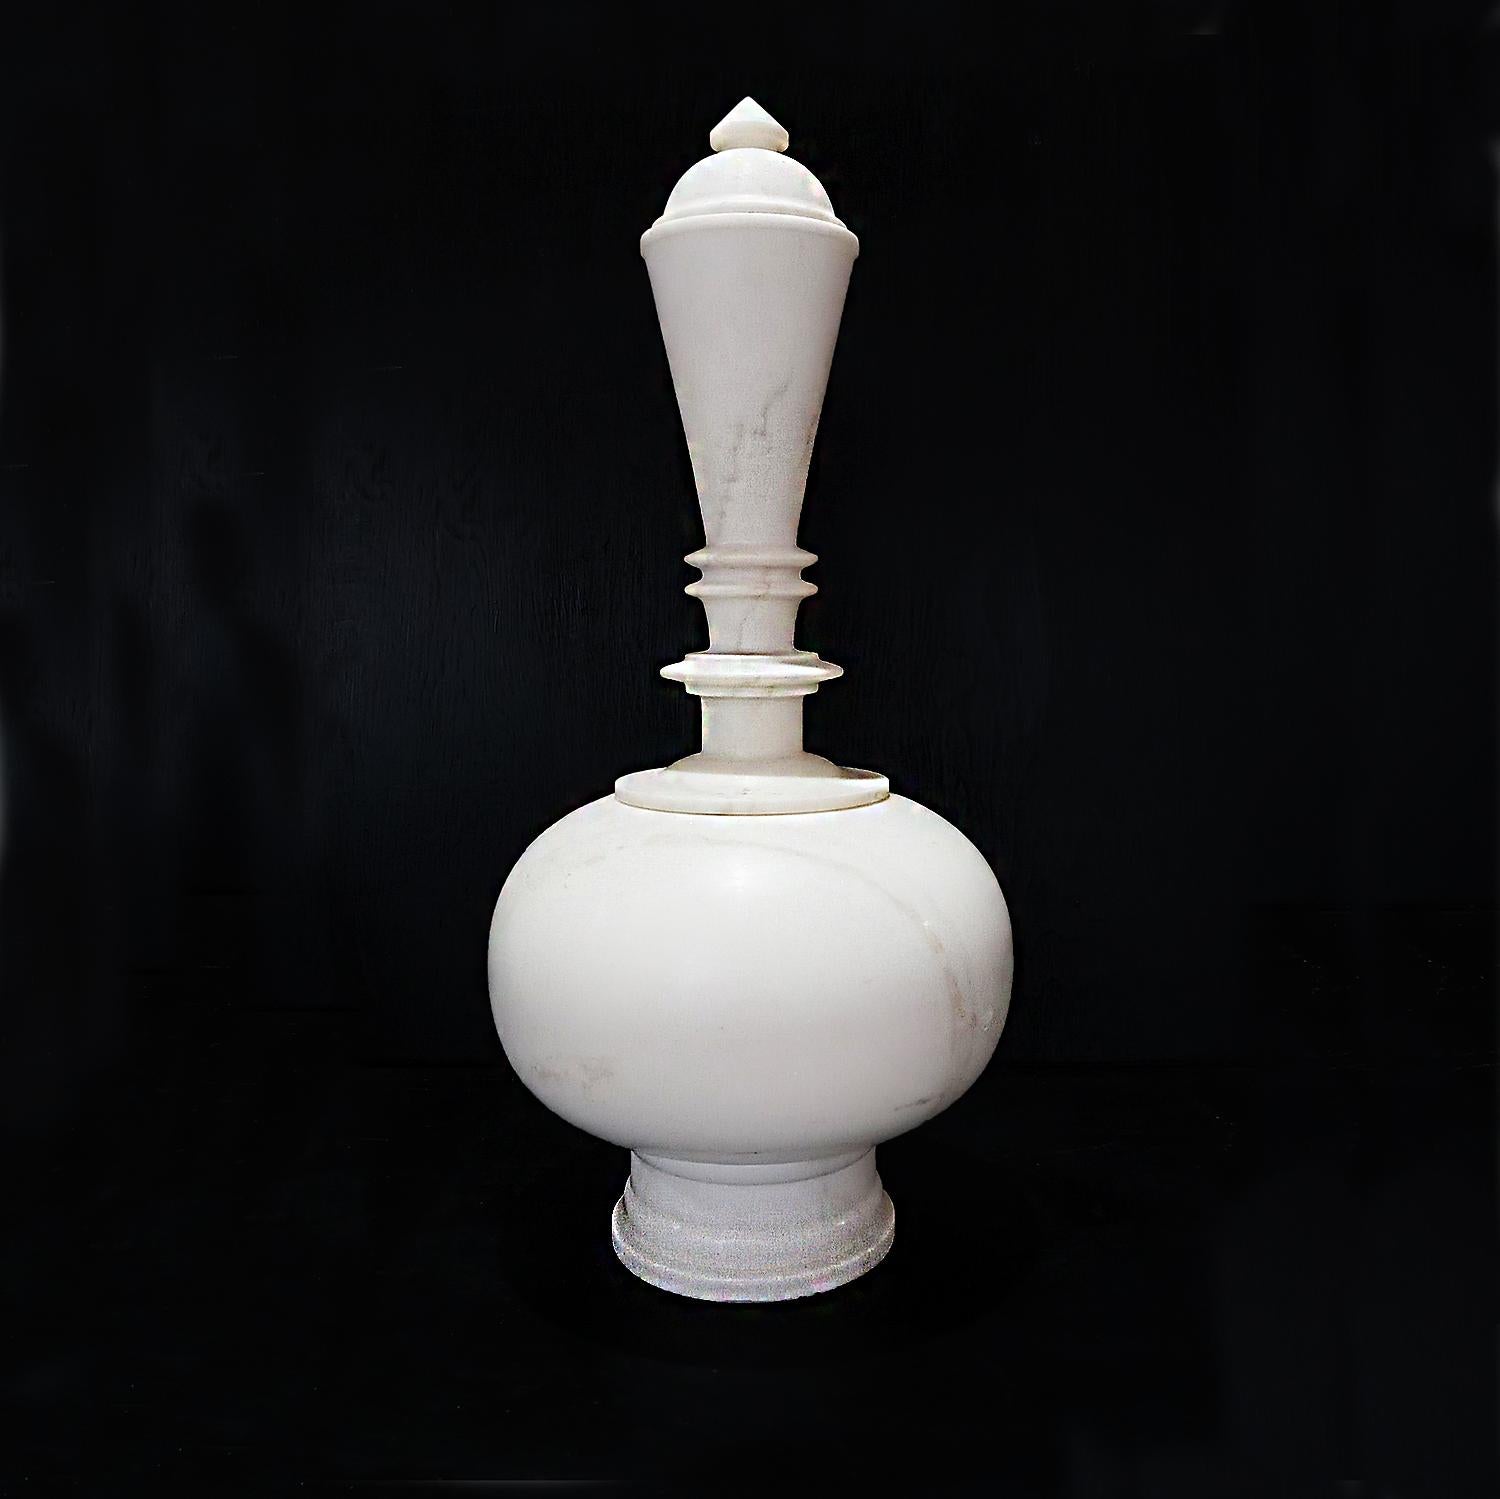 A superb fluted neck vase with lid, hand carved in India out of smooth white marble and polished to perfection. Top and bottom are detached into two pieces, which makes the round bottom part of the vase useful for flower arrangements. A marble cap